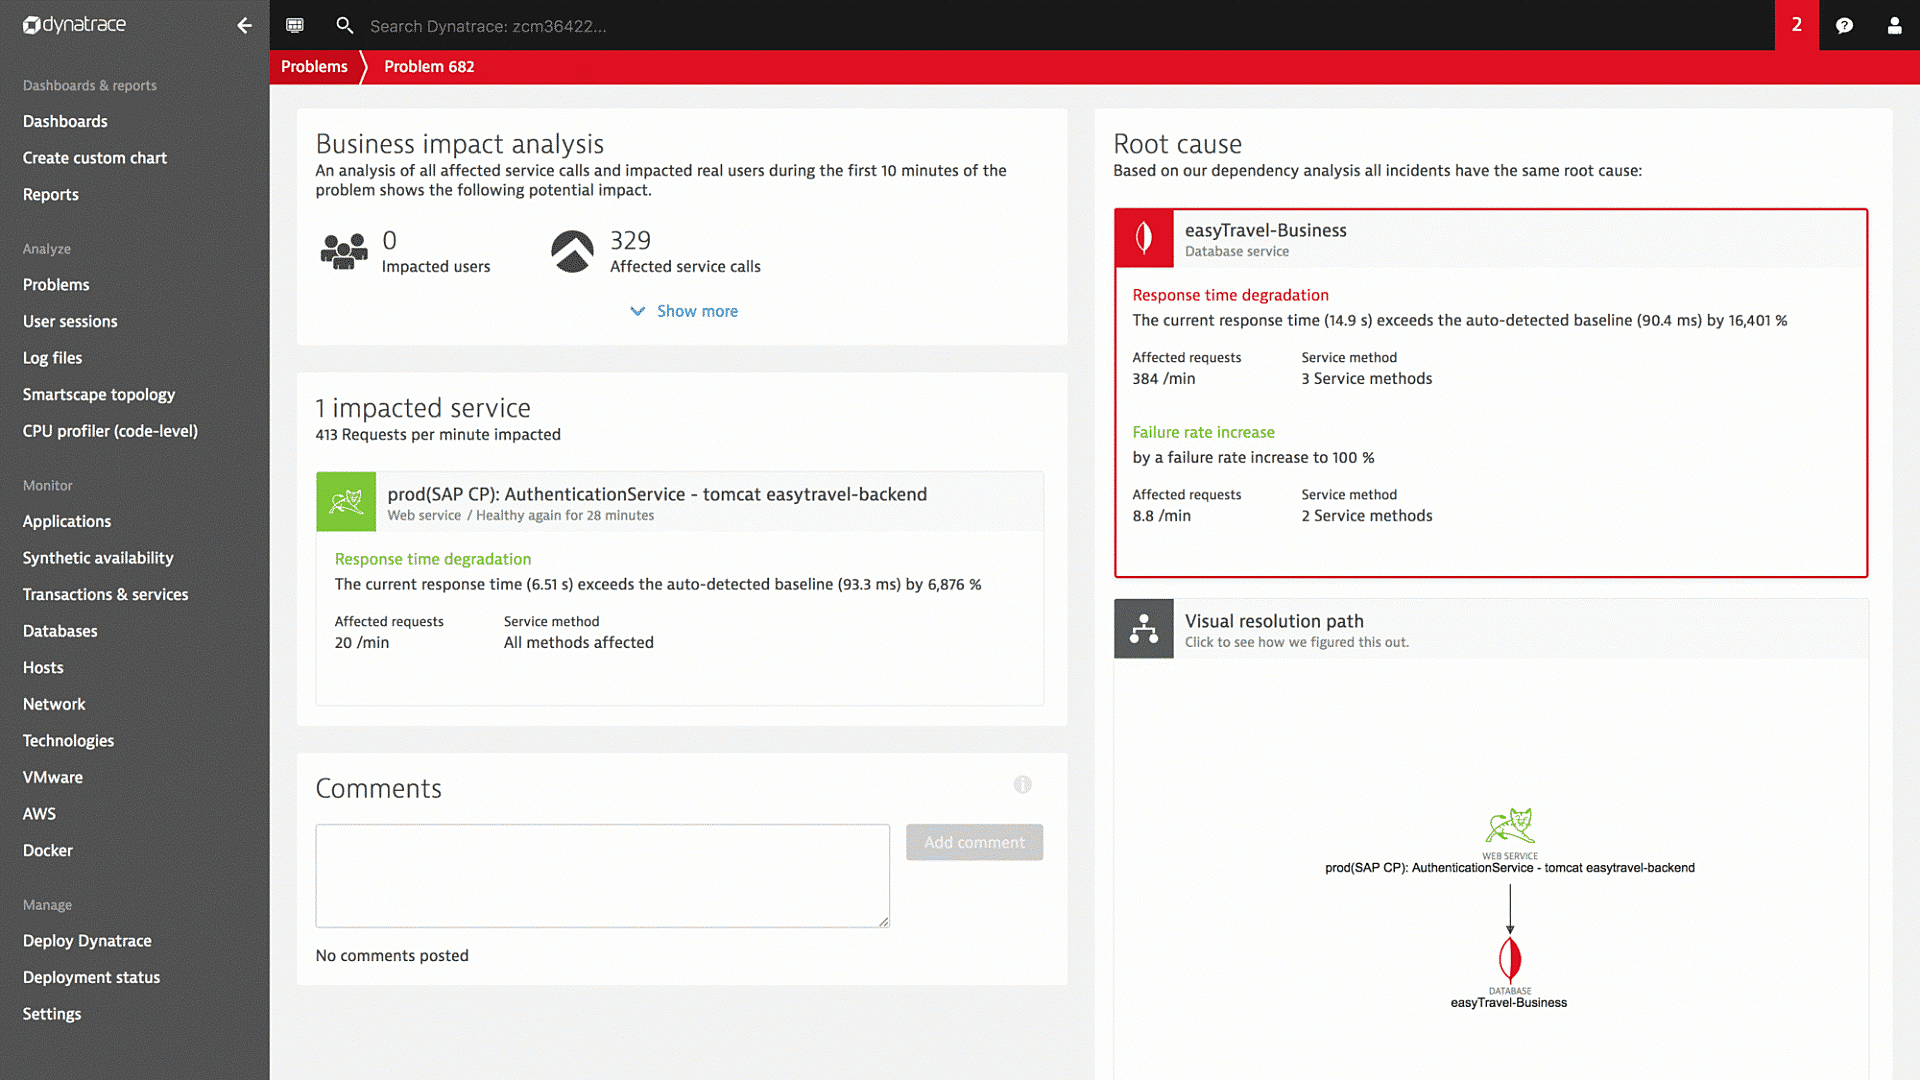 Business impact analysis problem with root cause Dynatrace screenshot